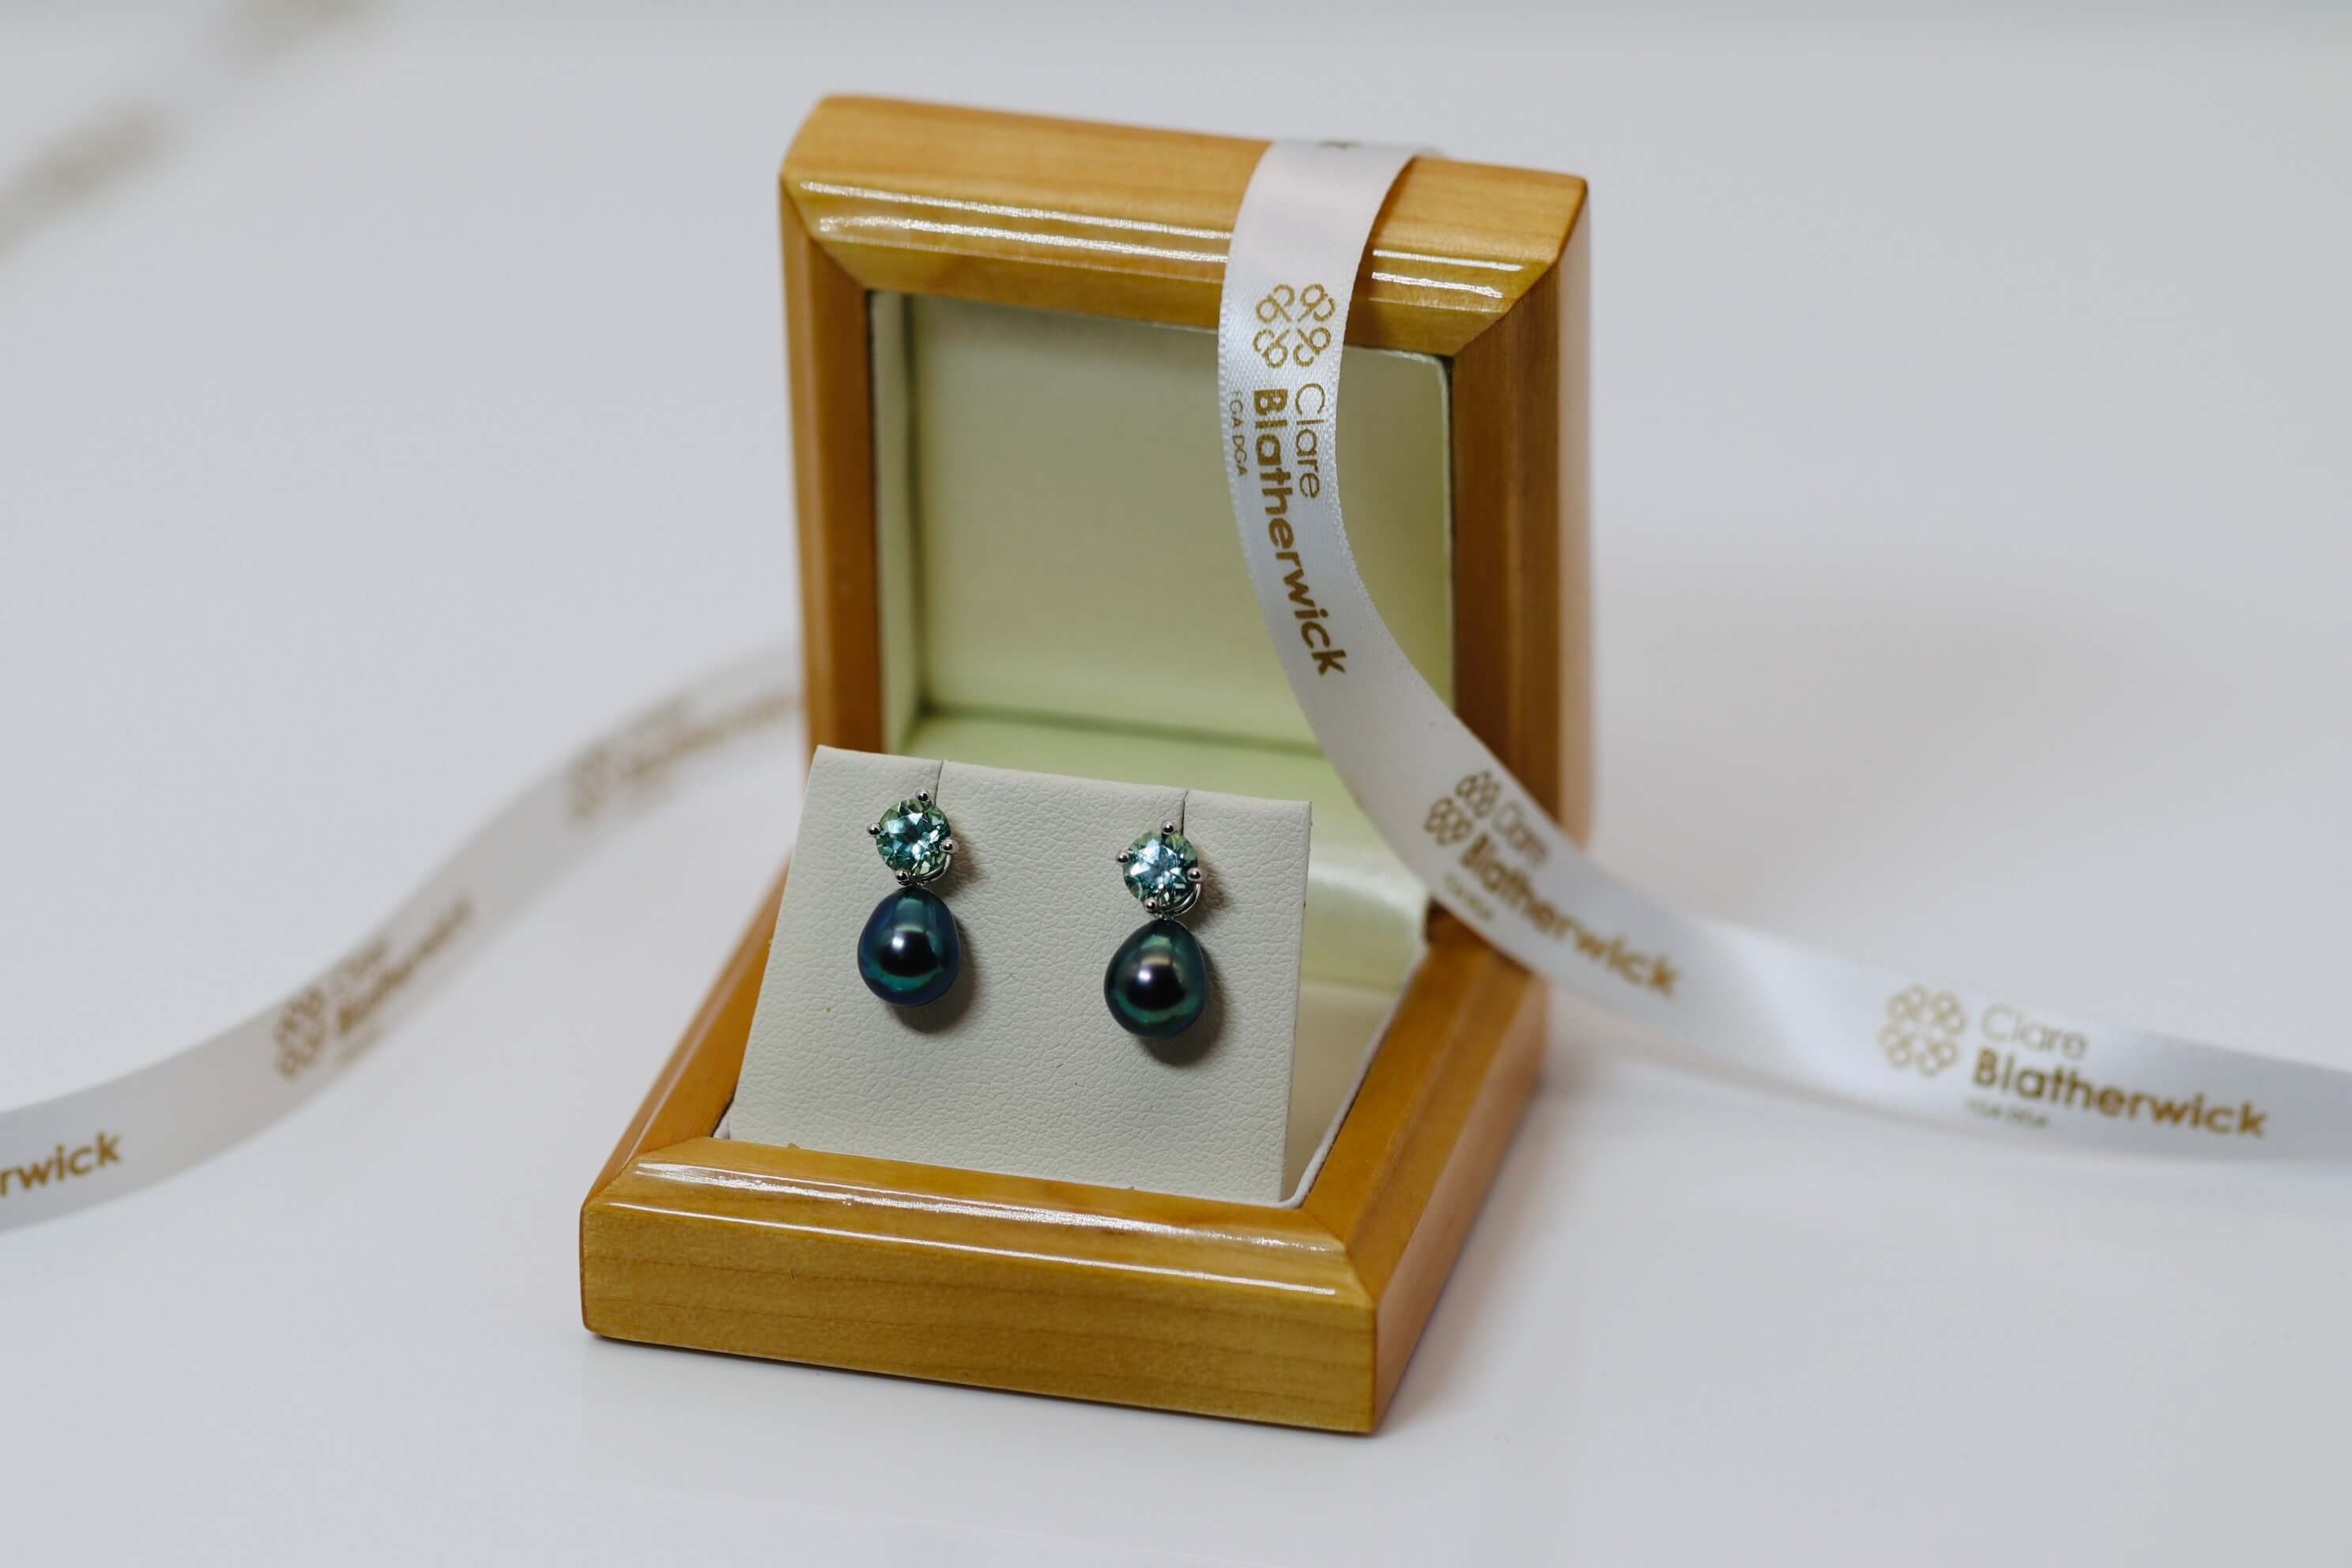 SOLD - HARMONY COLLECTION - A Pair of Mint Tourmaline Earstuds with Detachable Freshwater Cultured Pearl Drops